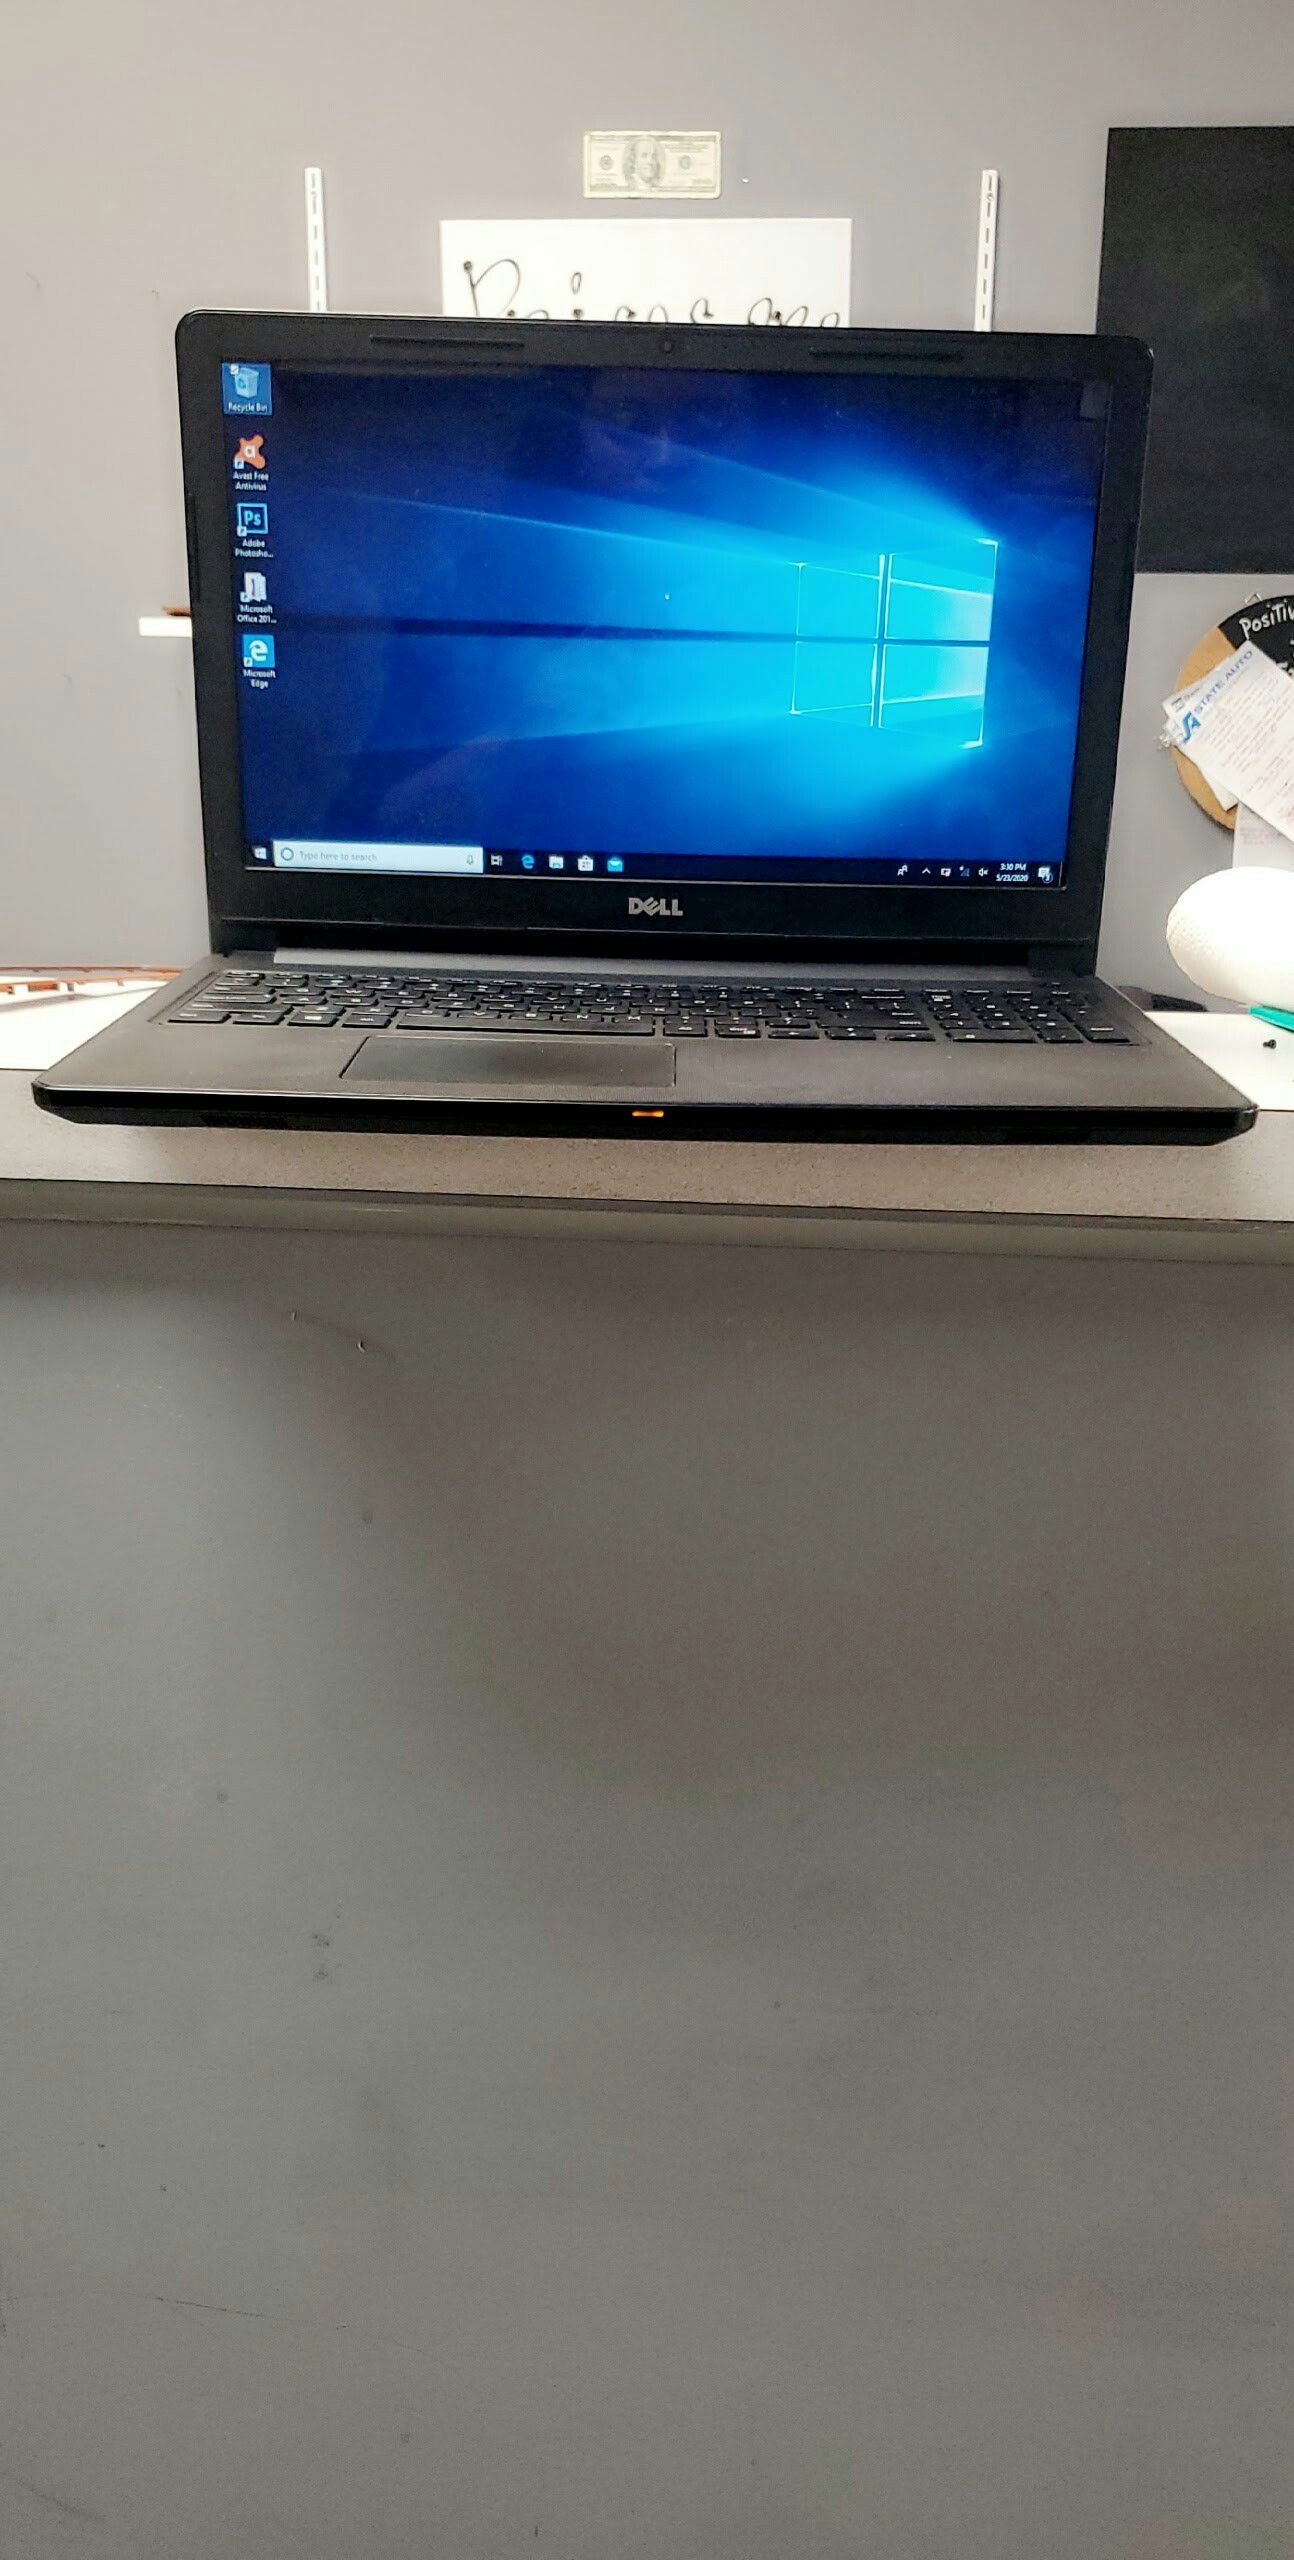 TOUCHSCREEN Dell Inspiron with software and windows